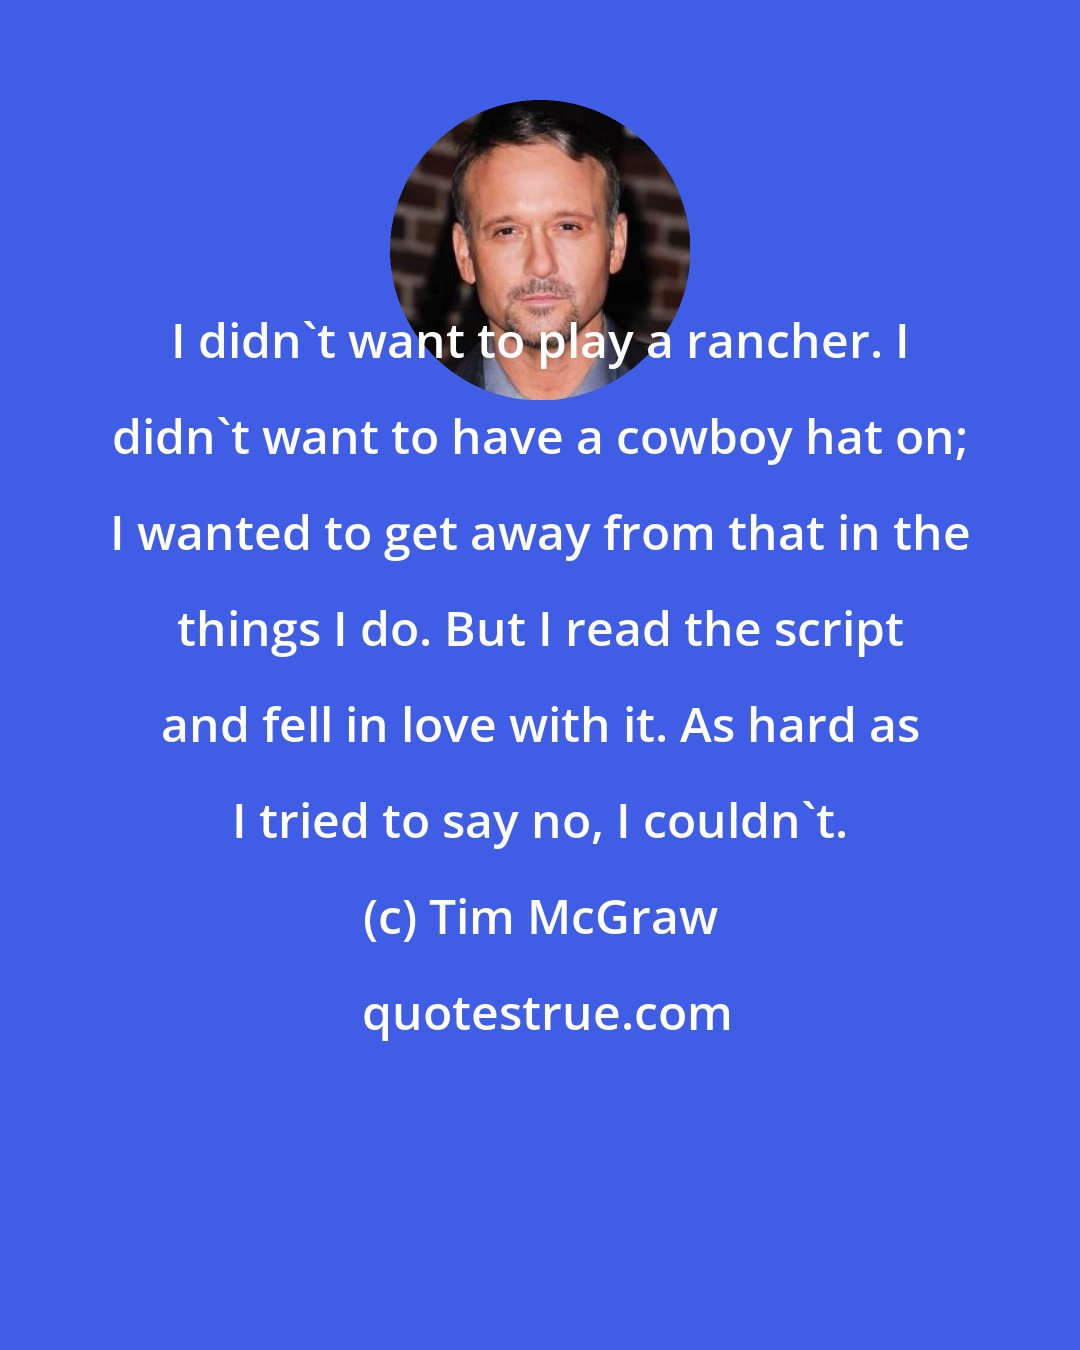 Tim McGraw: I didn't want to play a rancher. I didn't want to have a cowboy hat on; I wanted to get away from that in the things I do. But I read the script and fell in love with it. As hard as I tried to say no, I couldn't.